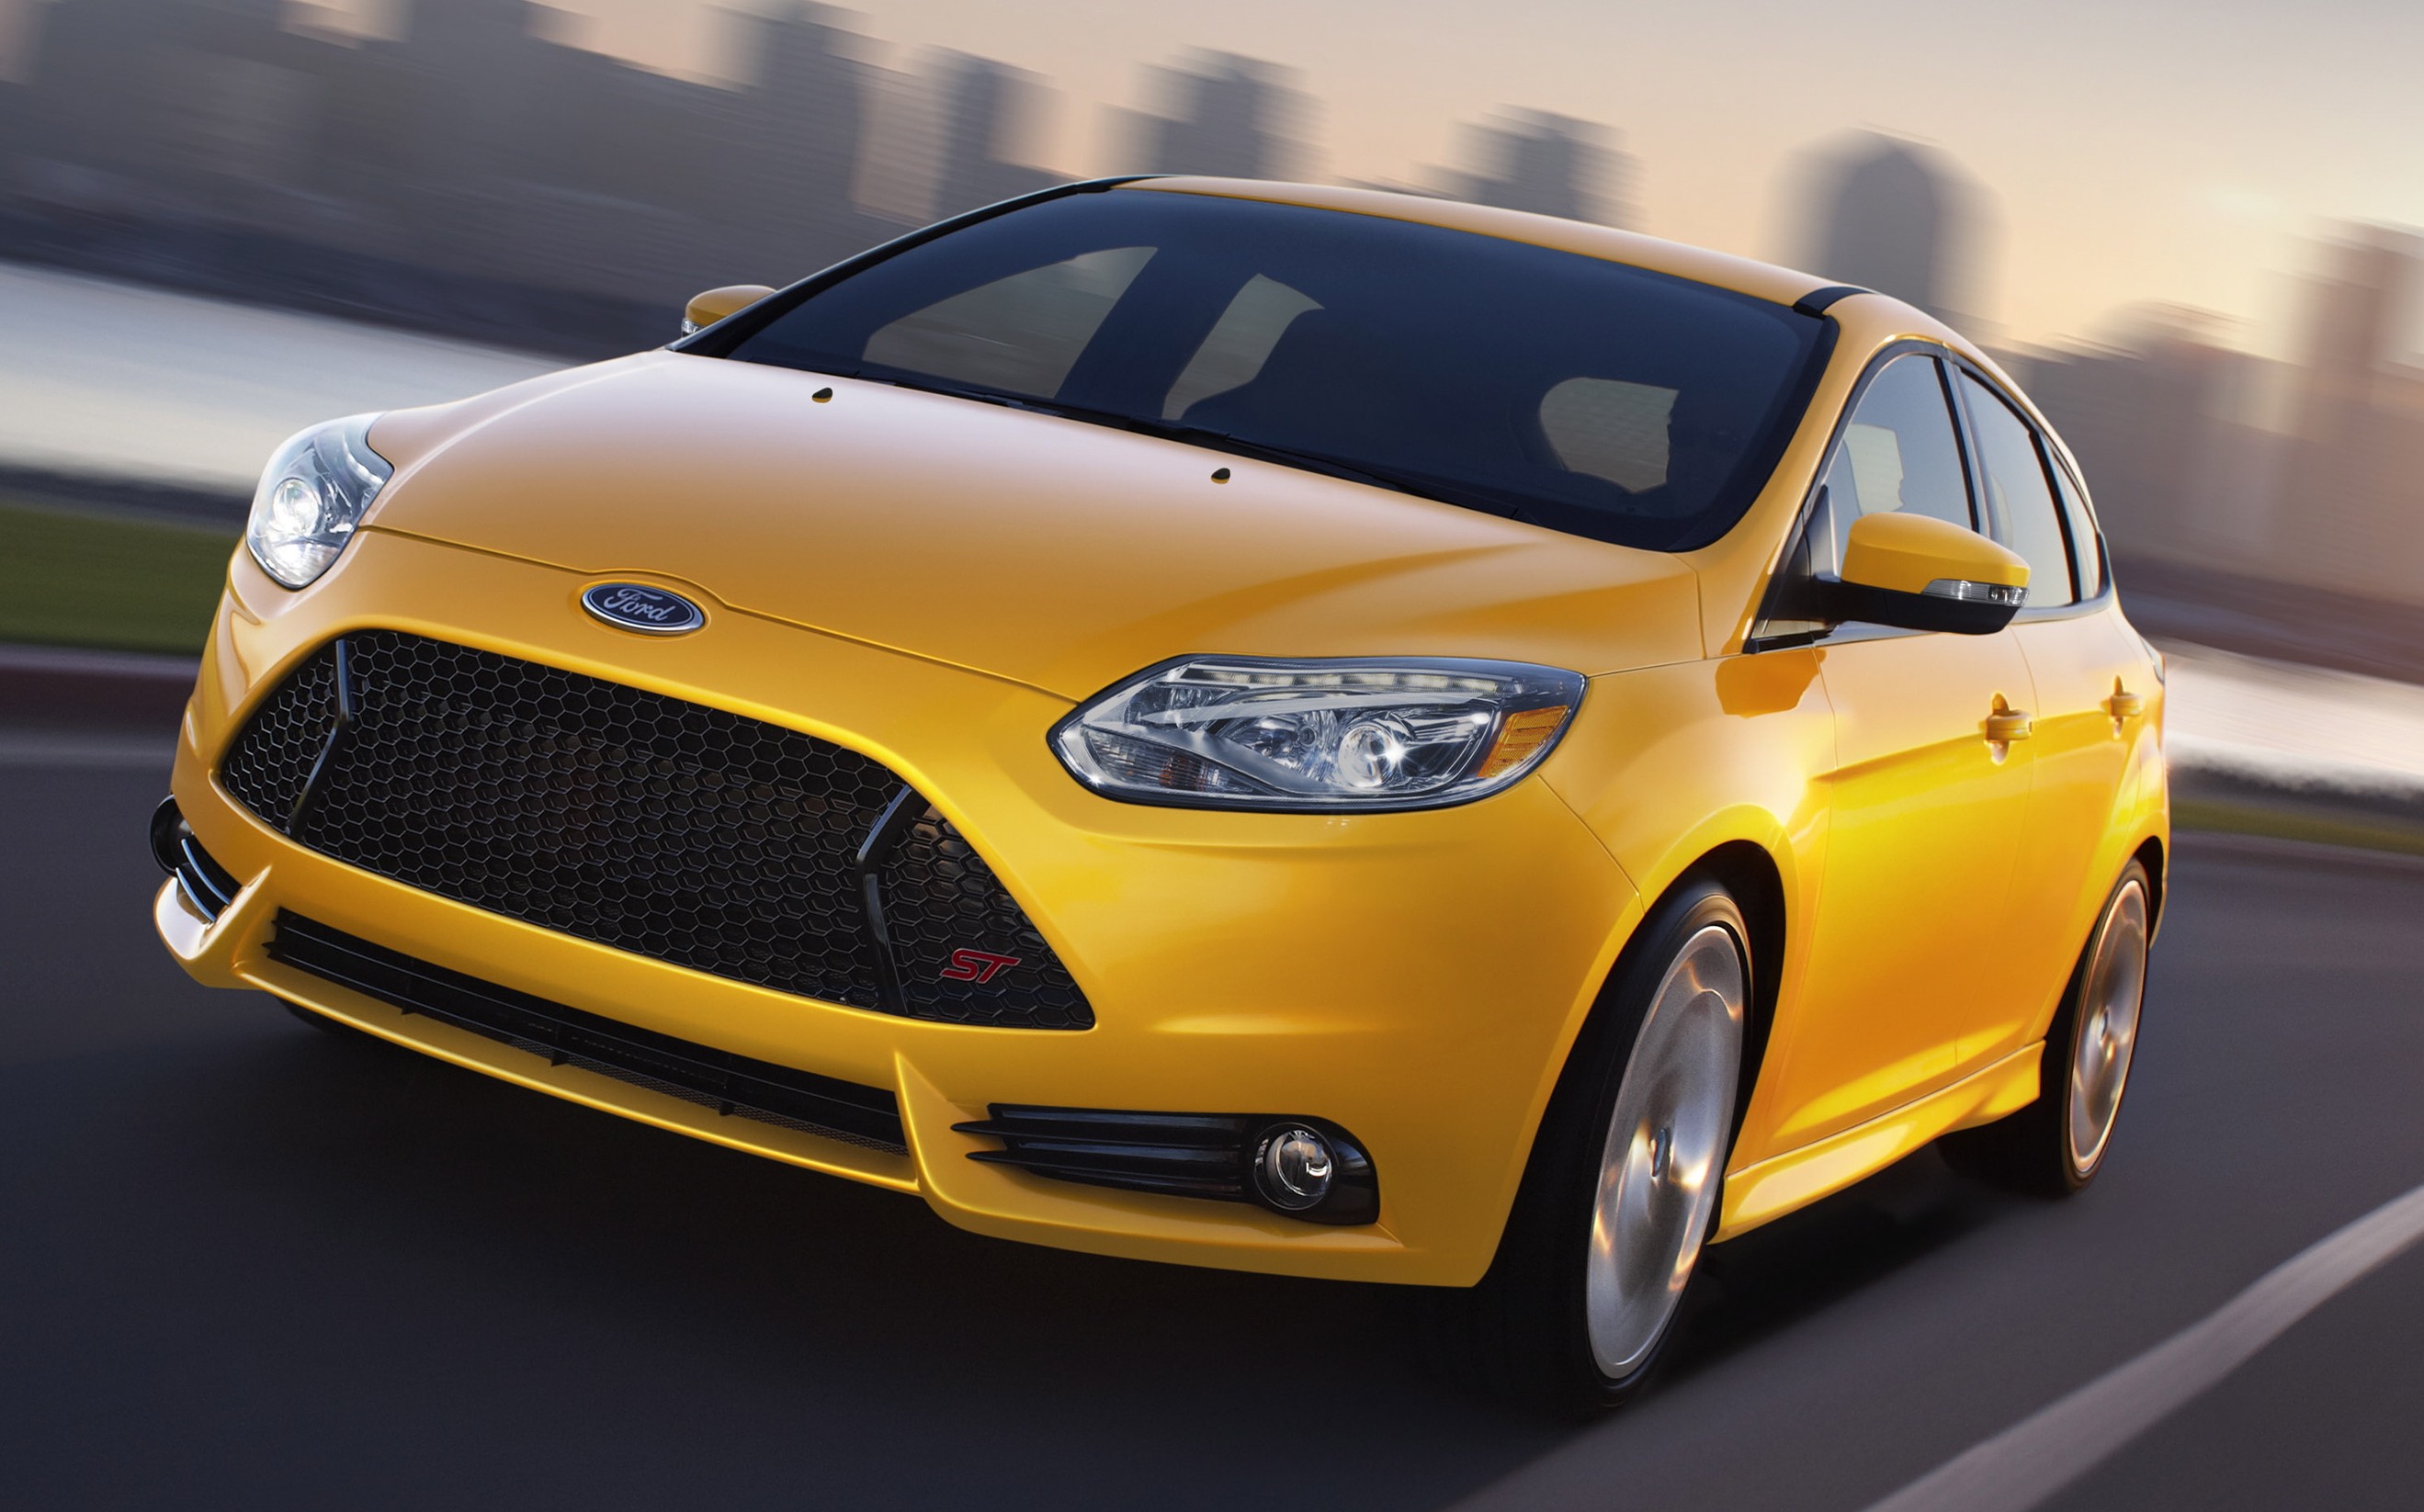 Losing Focus: Ford Focus Production to Stop for a Full Year